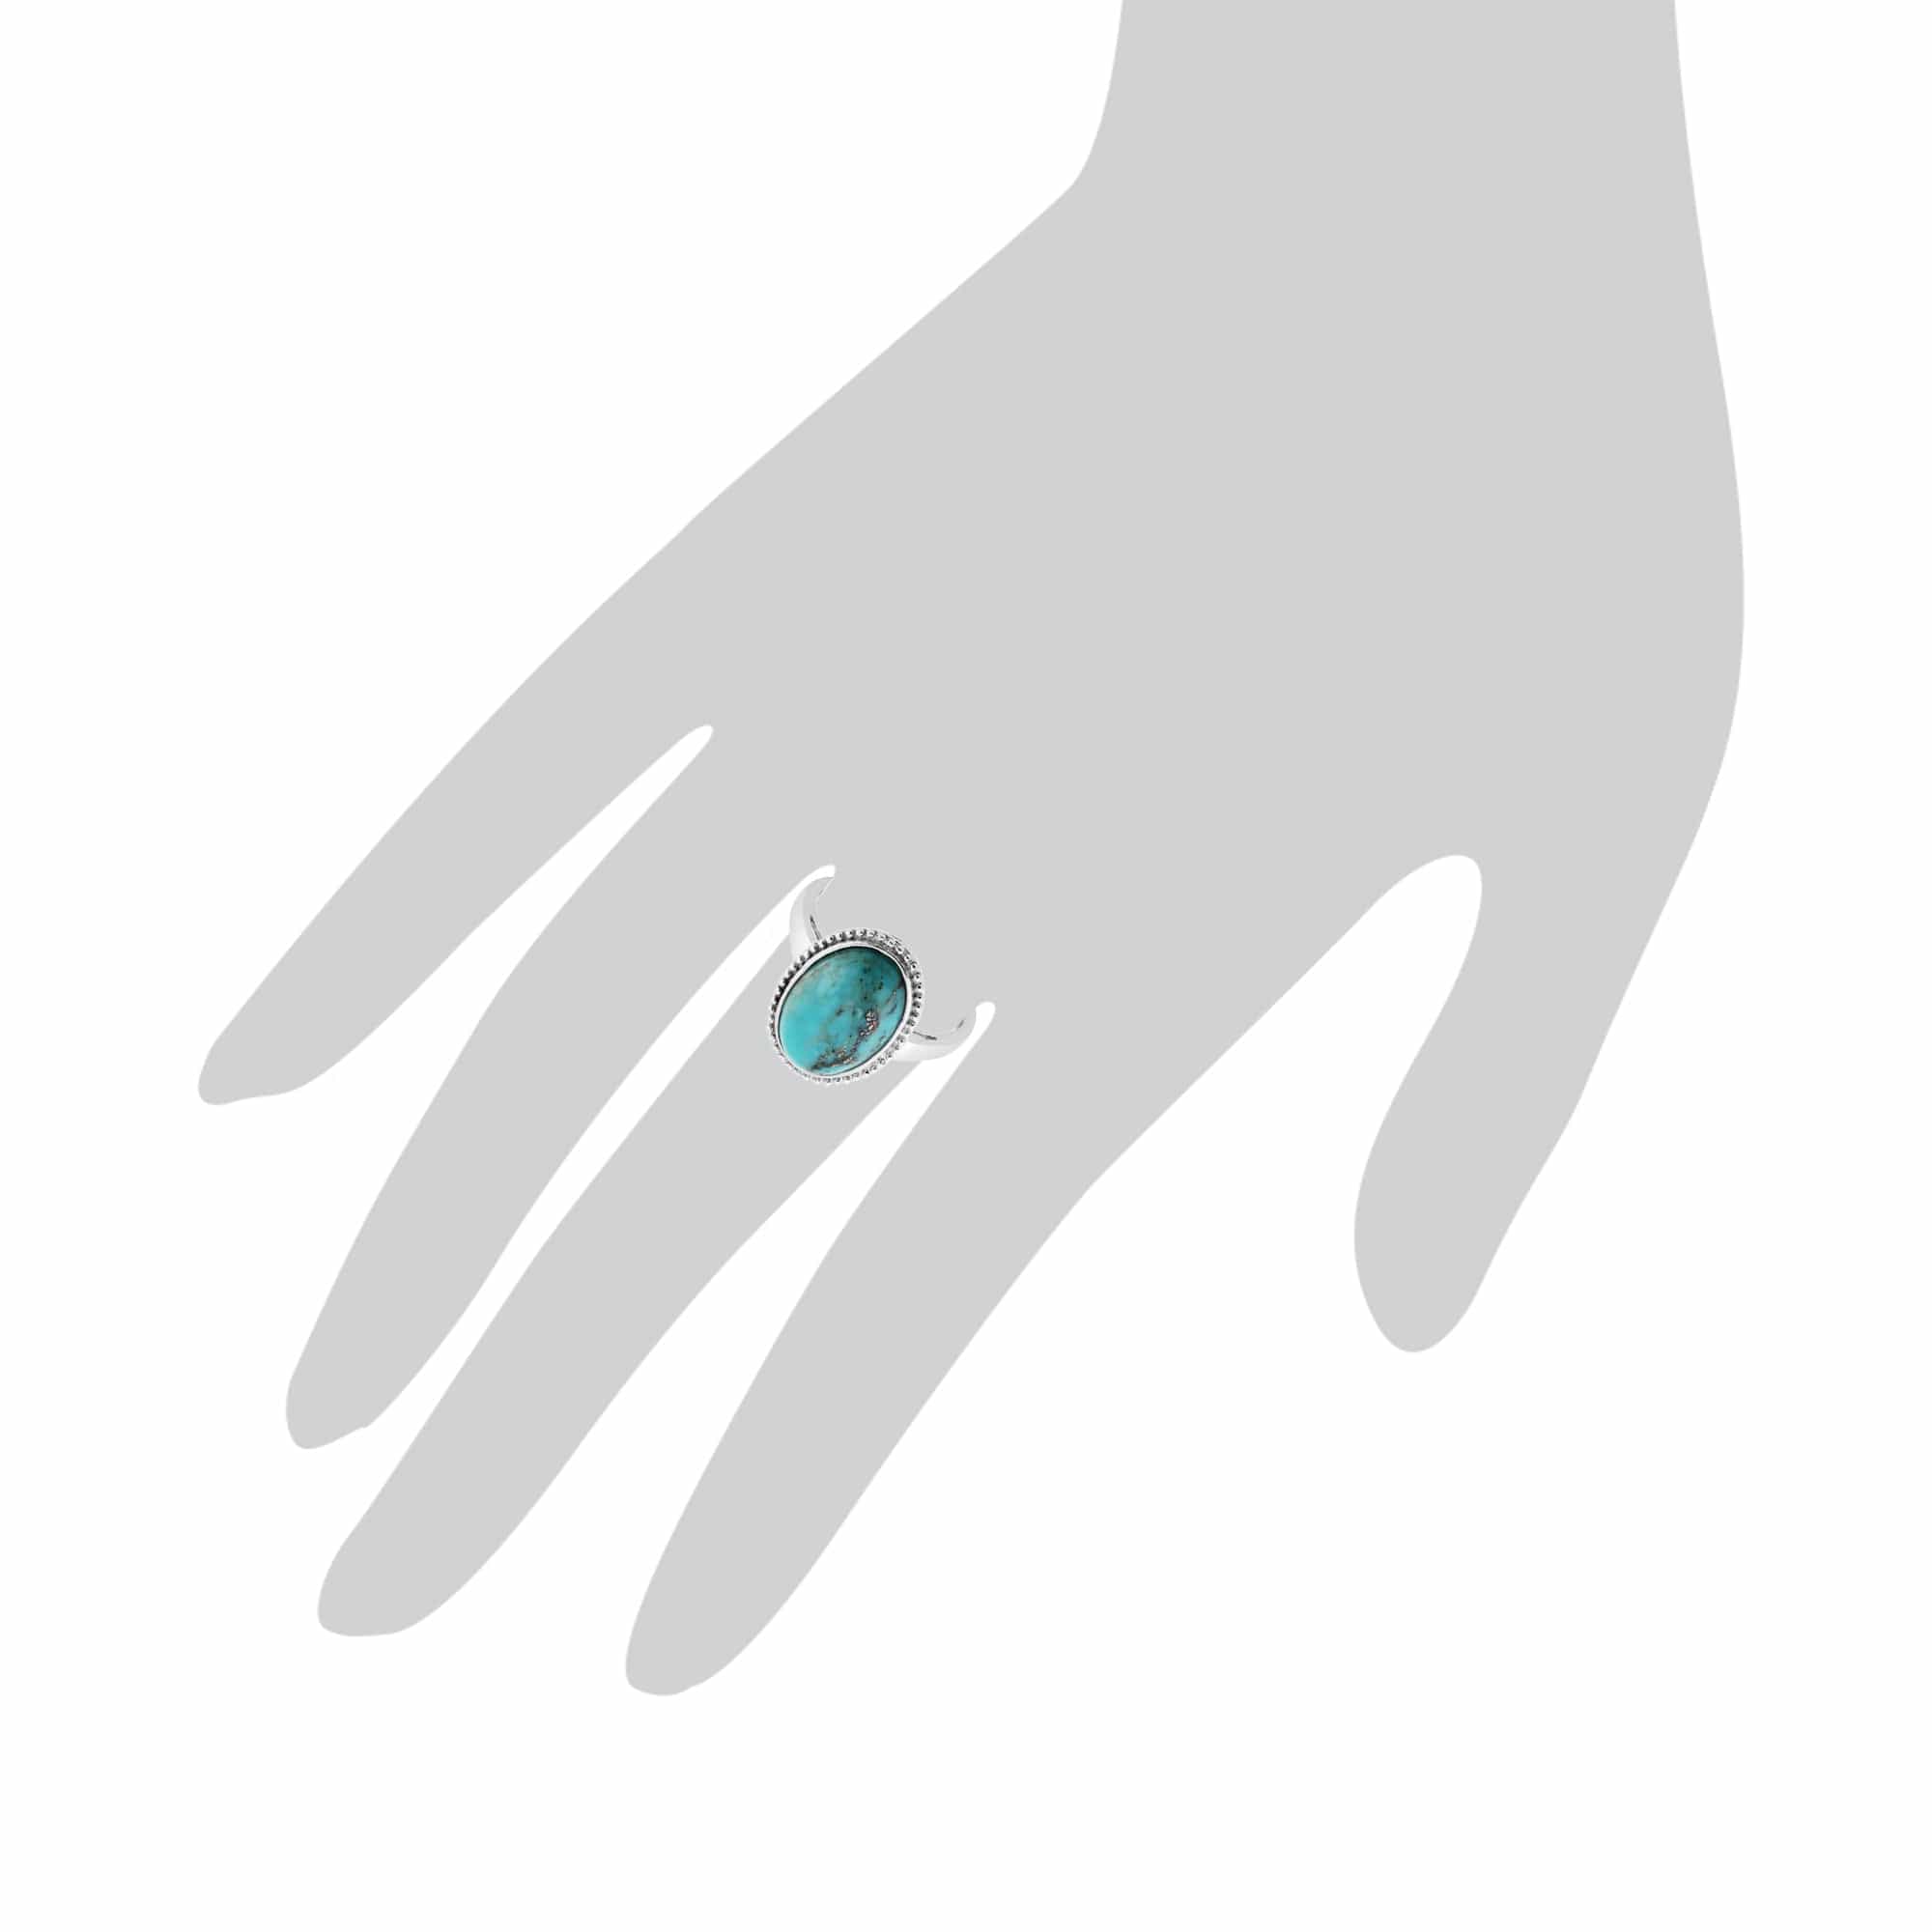 271R015901925 Gemondo Sterling Silver 4ct Turquoise Cabochon Oval Bezel Set Single Stone Ring 3